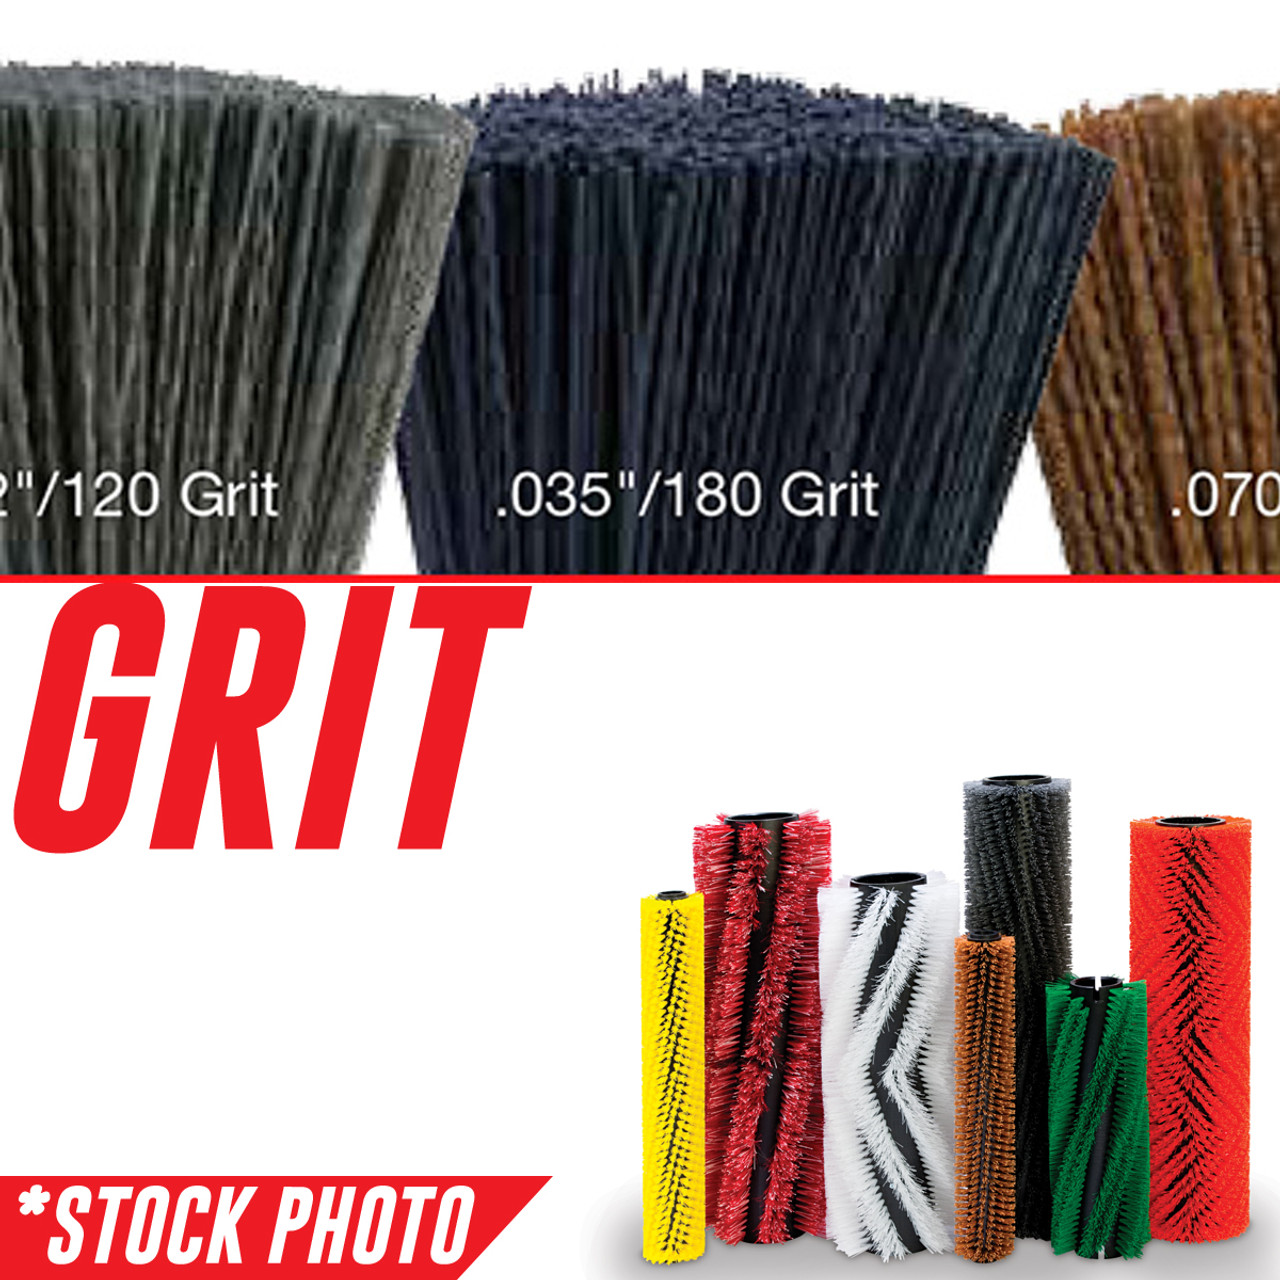 222309: 32" Cylindrical Brush 18 Single Row .050" Grit fits Tennant Models 5700-800C, 7100 32", T5, T7 32"